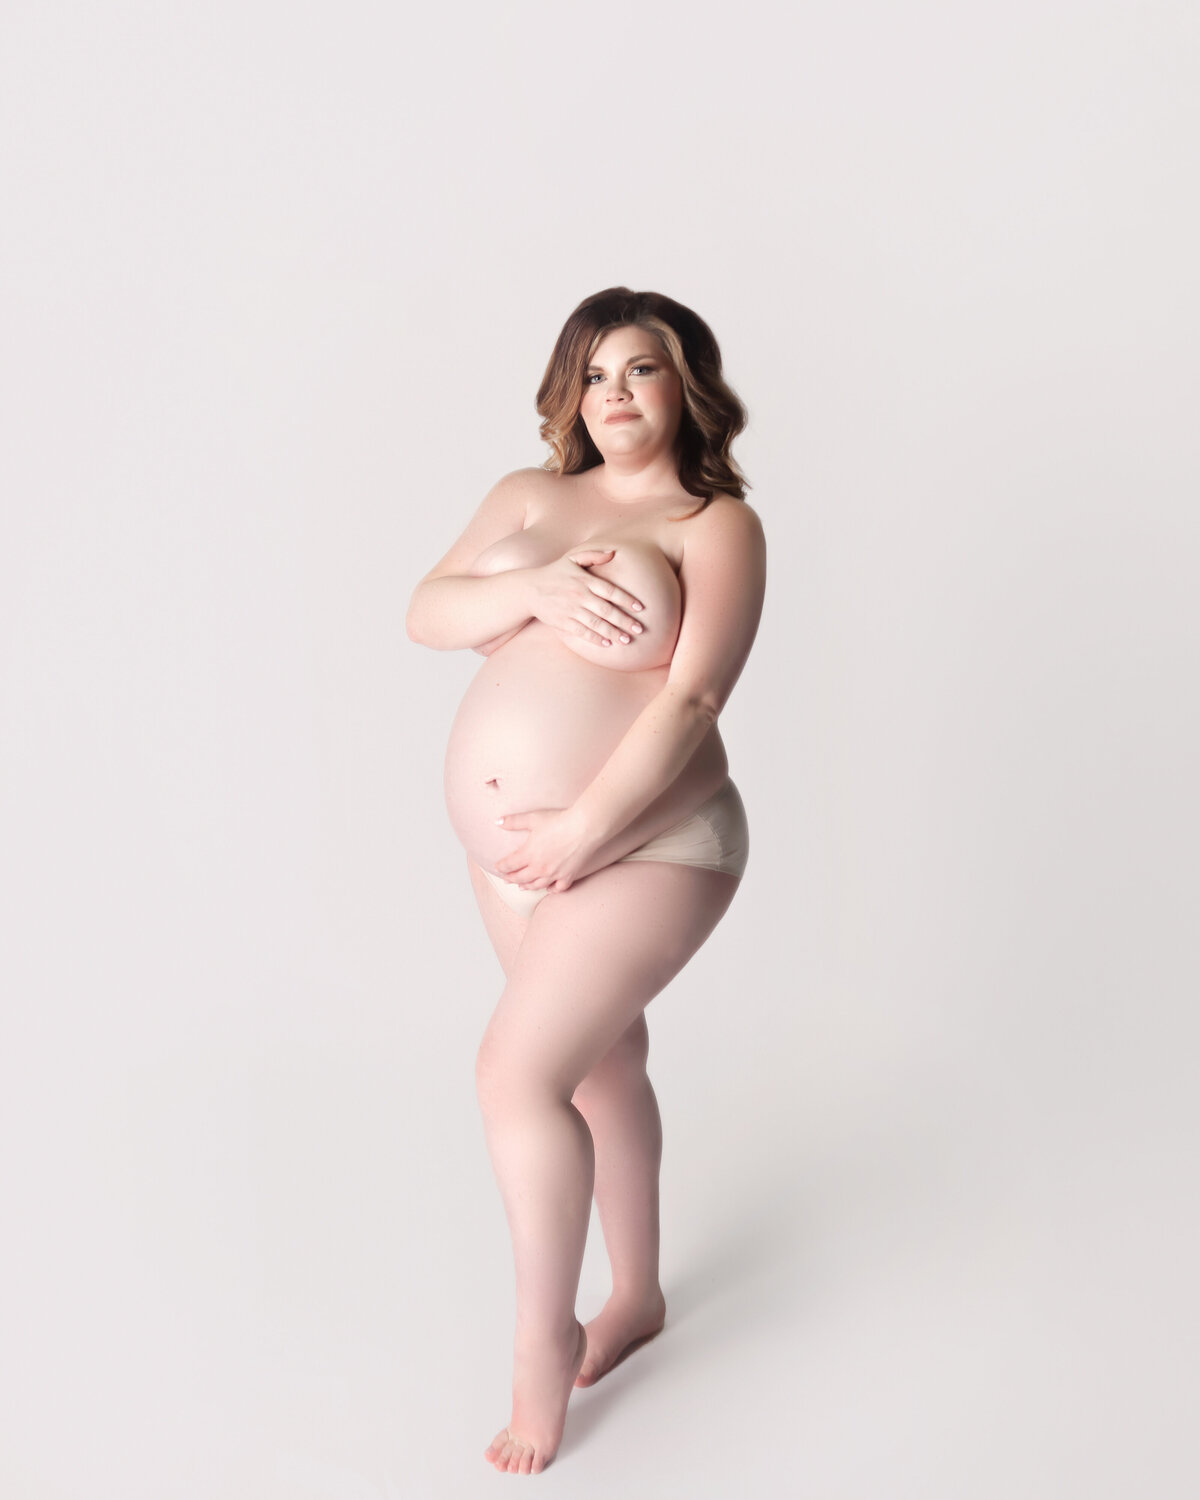 pregnant women posing nude during maternity photoshoot